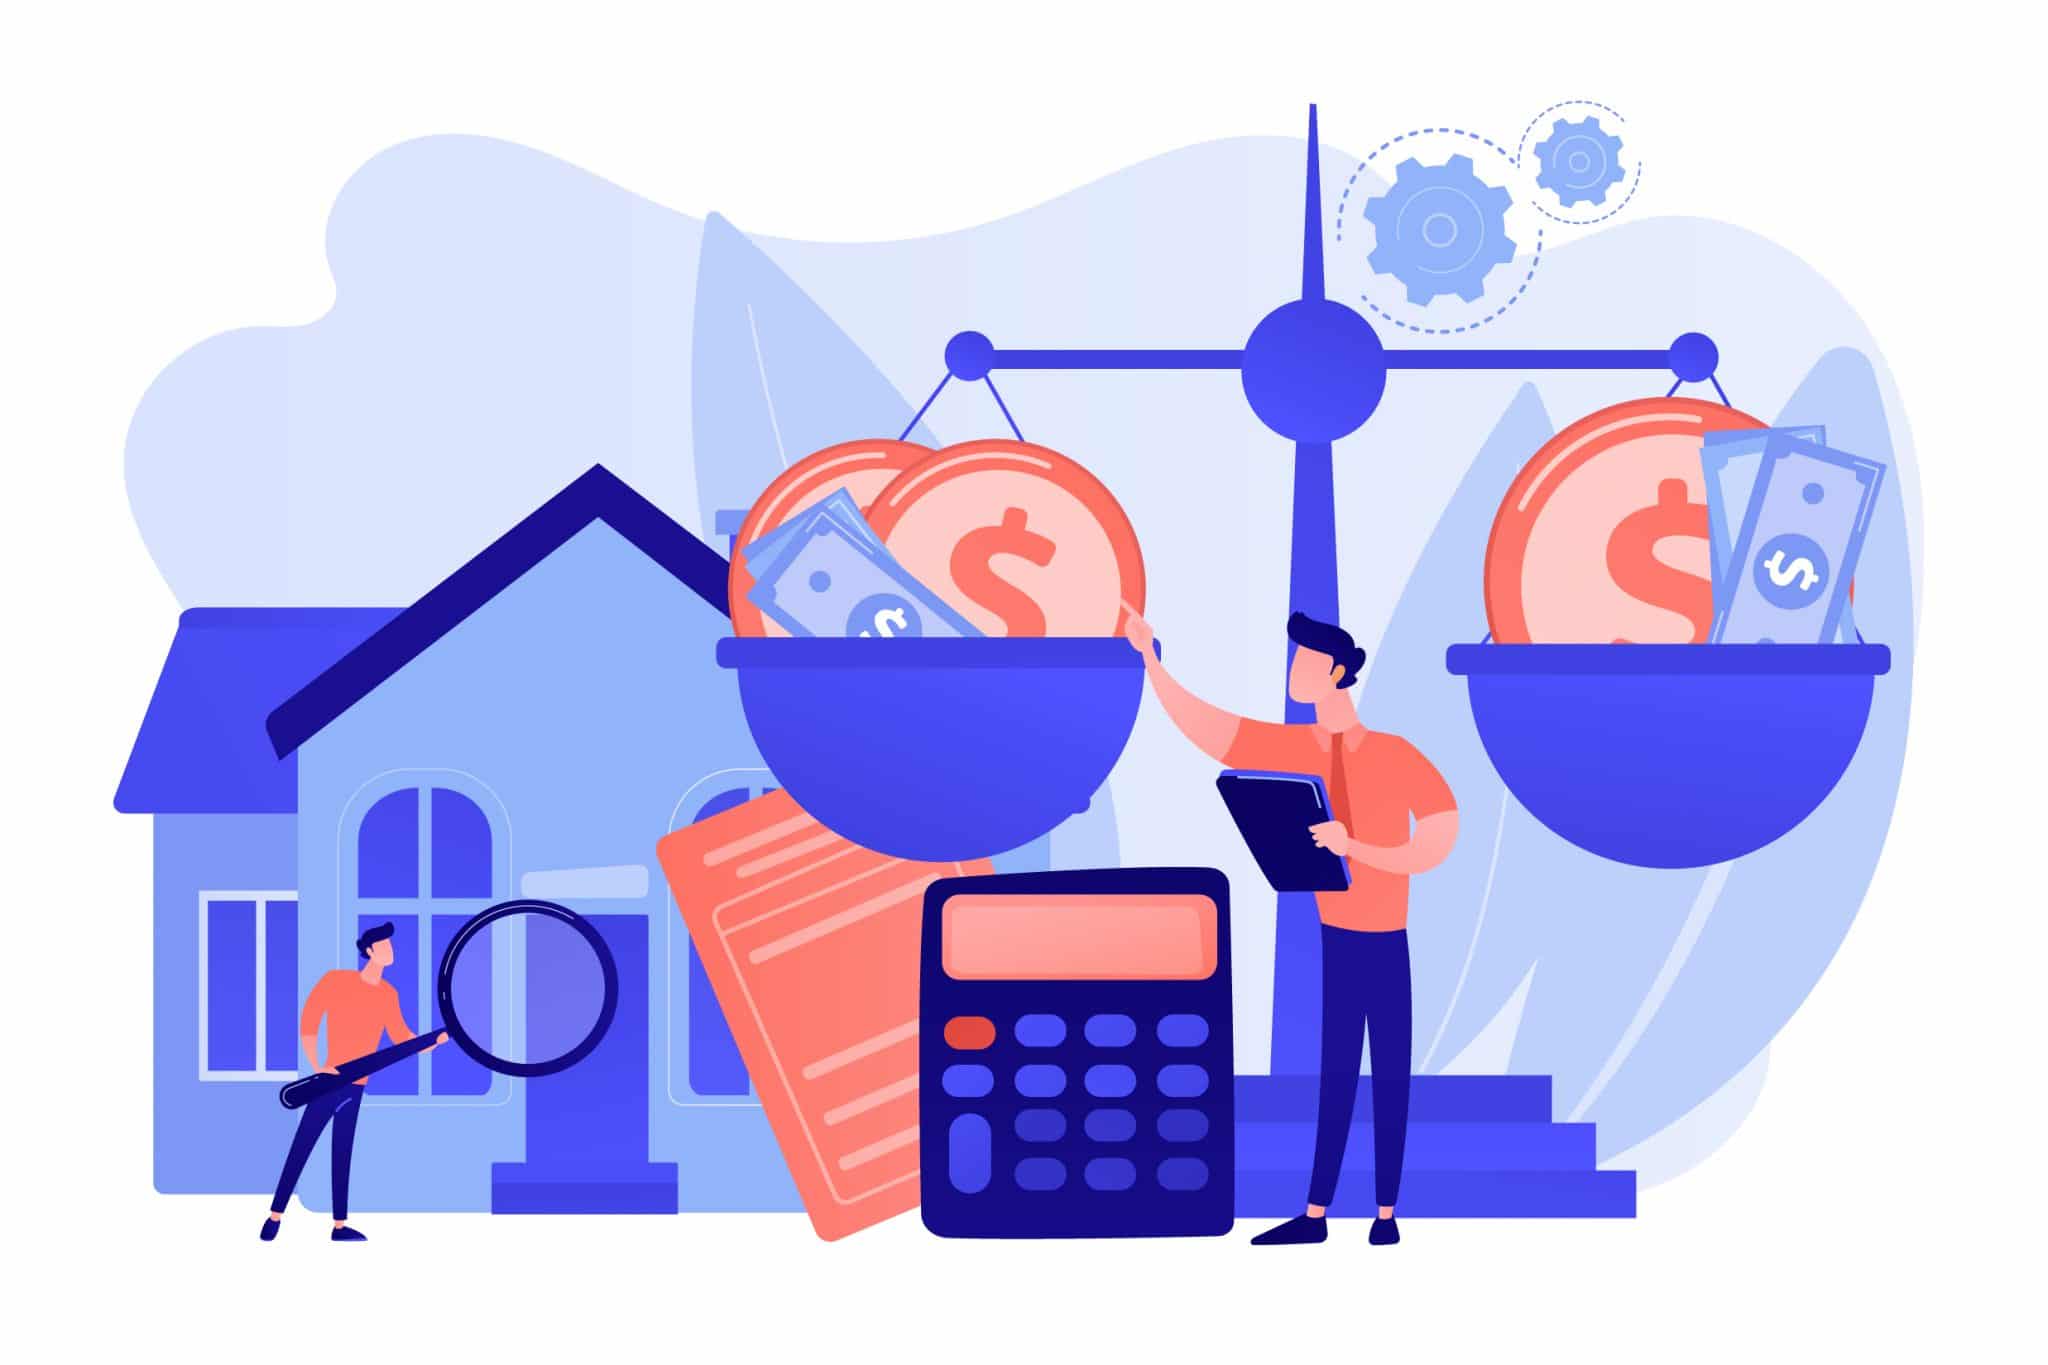 Illustration of two figures in front of a home. One is holding a magnifying glass up to the home. The other figure is standing beside a scale that contains dollar bills and coins. There is an illustration of a calculator to the left of the second figure.